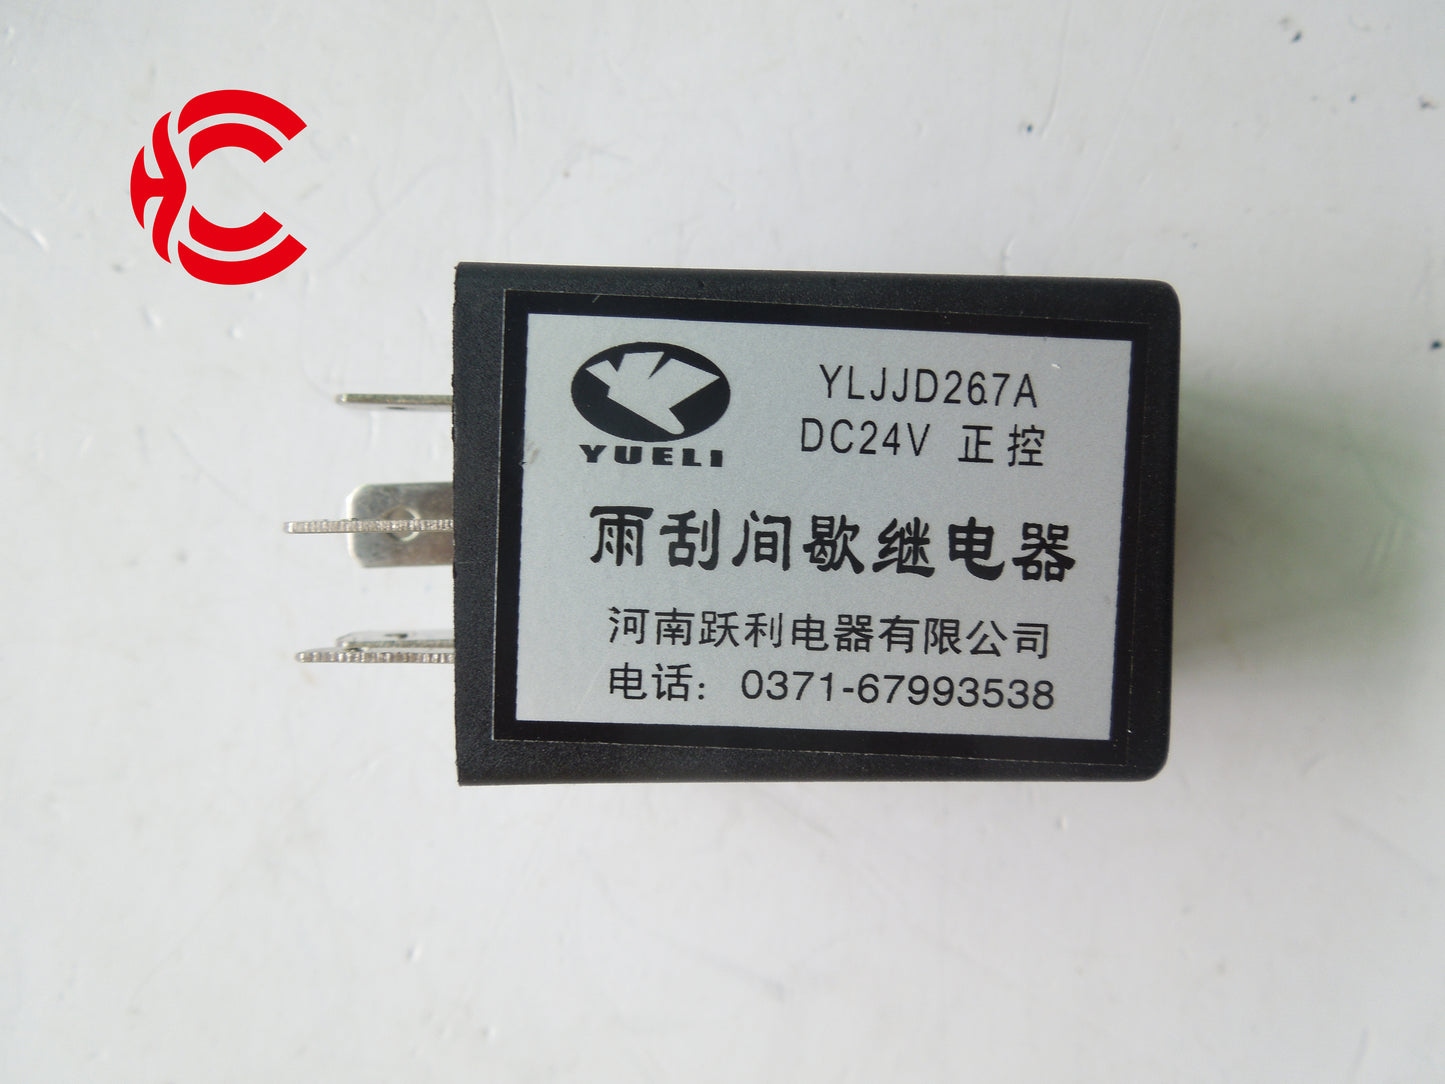 OEM: YLJJD267A Positive ControlMaterial: ABS Color: black Origin: Made in ChinaWeight: 50gPacking List: 1* Wiper Intermittent Relay More ServiceWe can provide OEM Manufacturing serviceWe can Be your one-step solution for Auto PartsWe can provide technical scheme for you Feel Free to Contact Us, We will get back to you as soon as possible.